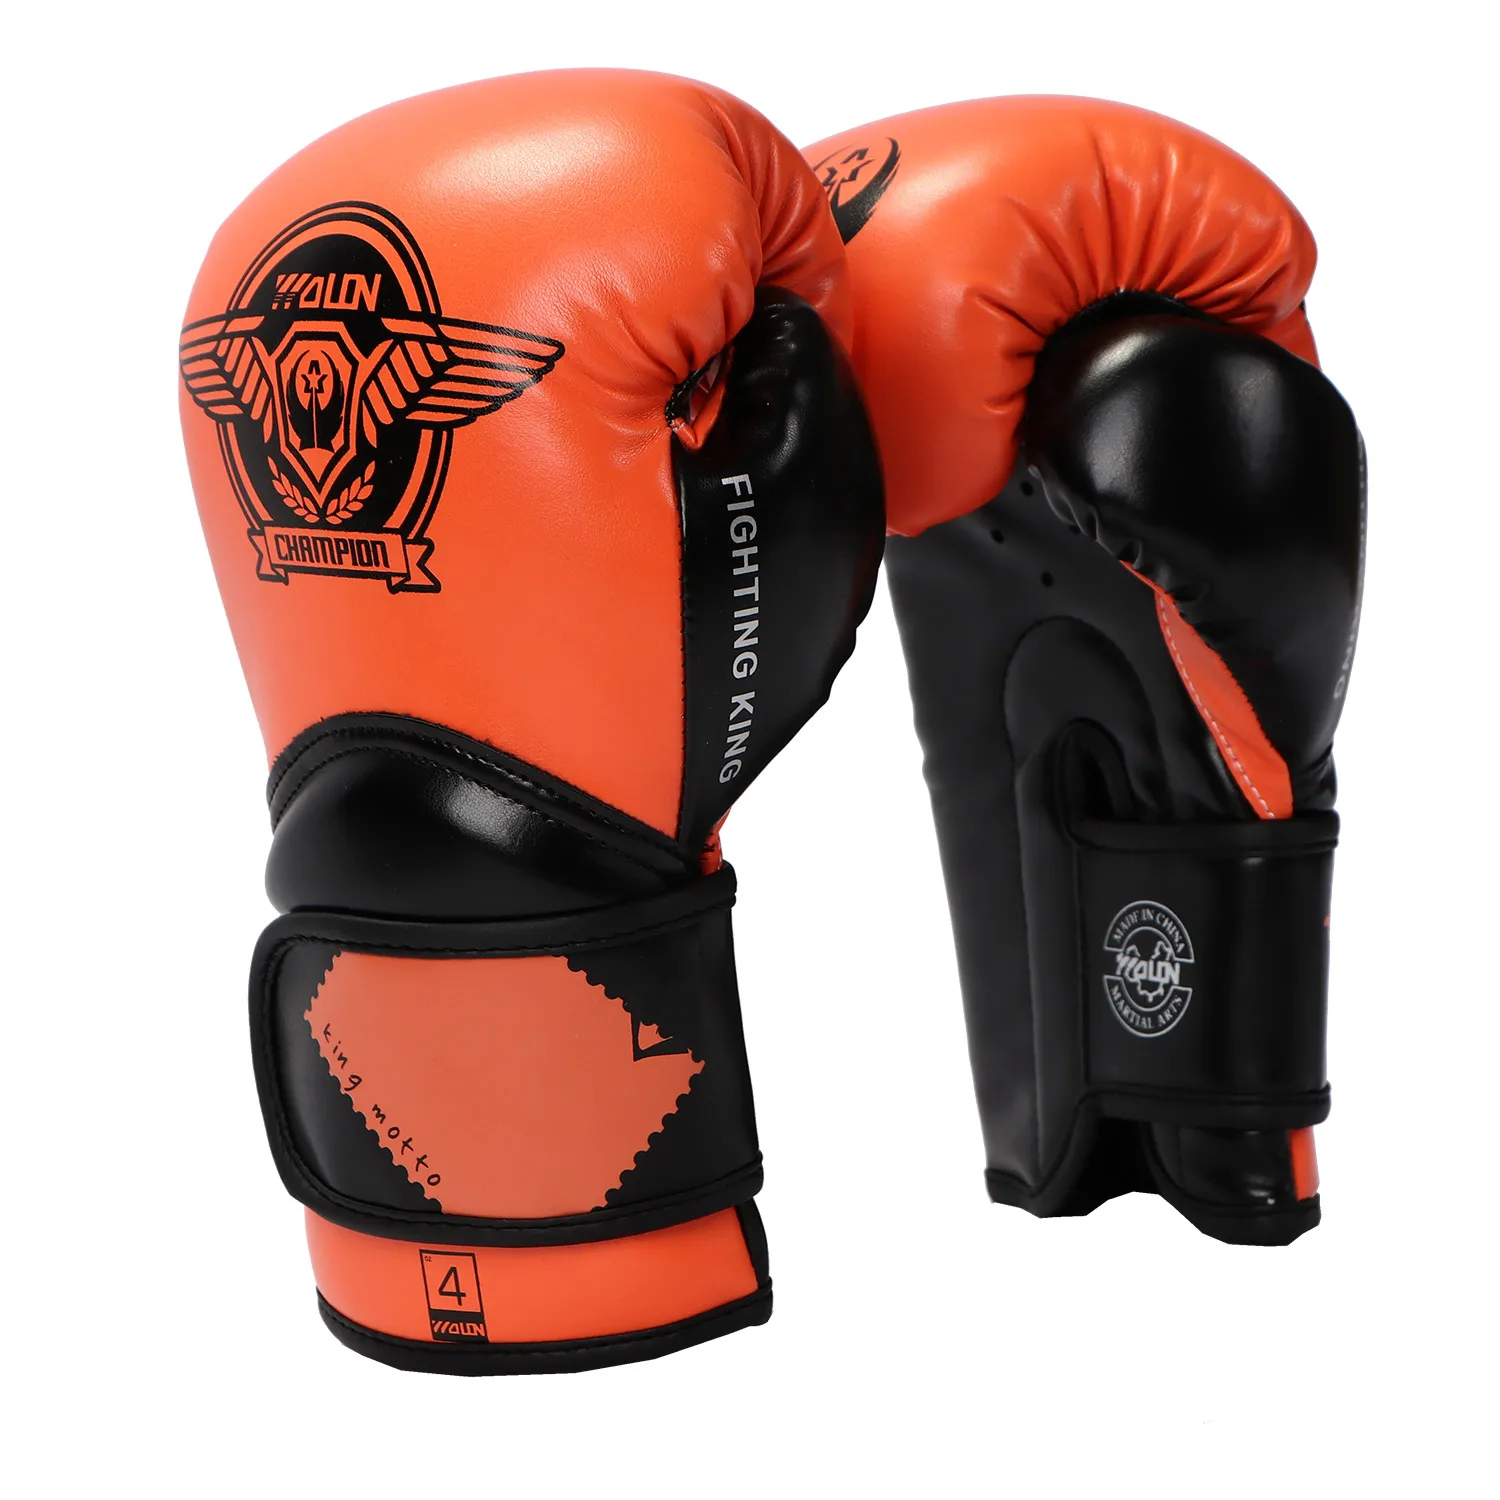 Details about   Children Kids Cartoon Boxing Gloves Sparring Punching Fight Training Age 3-10 